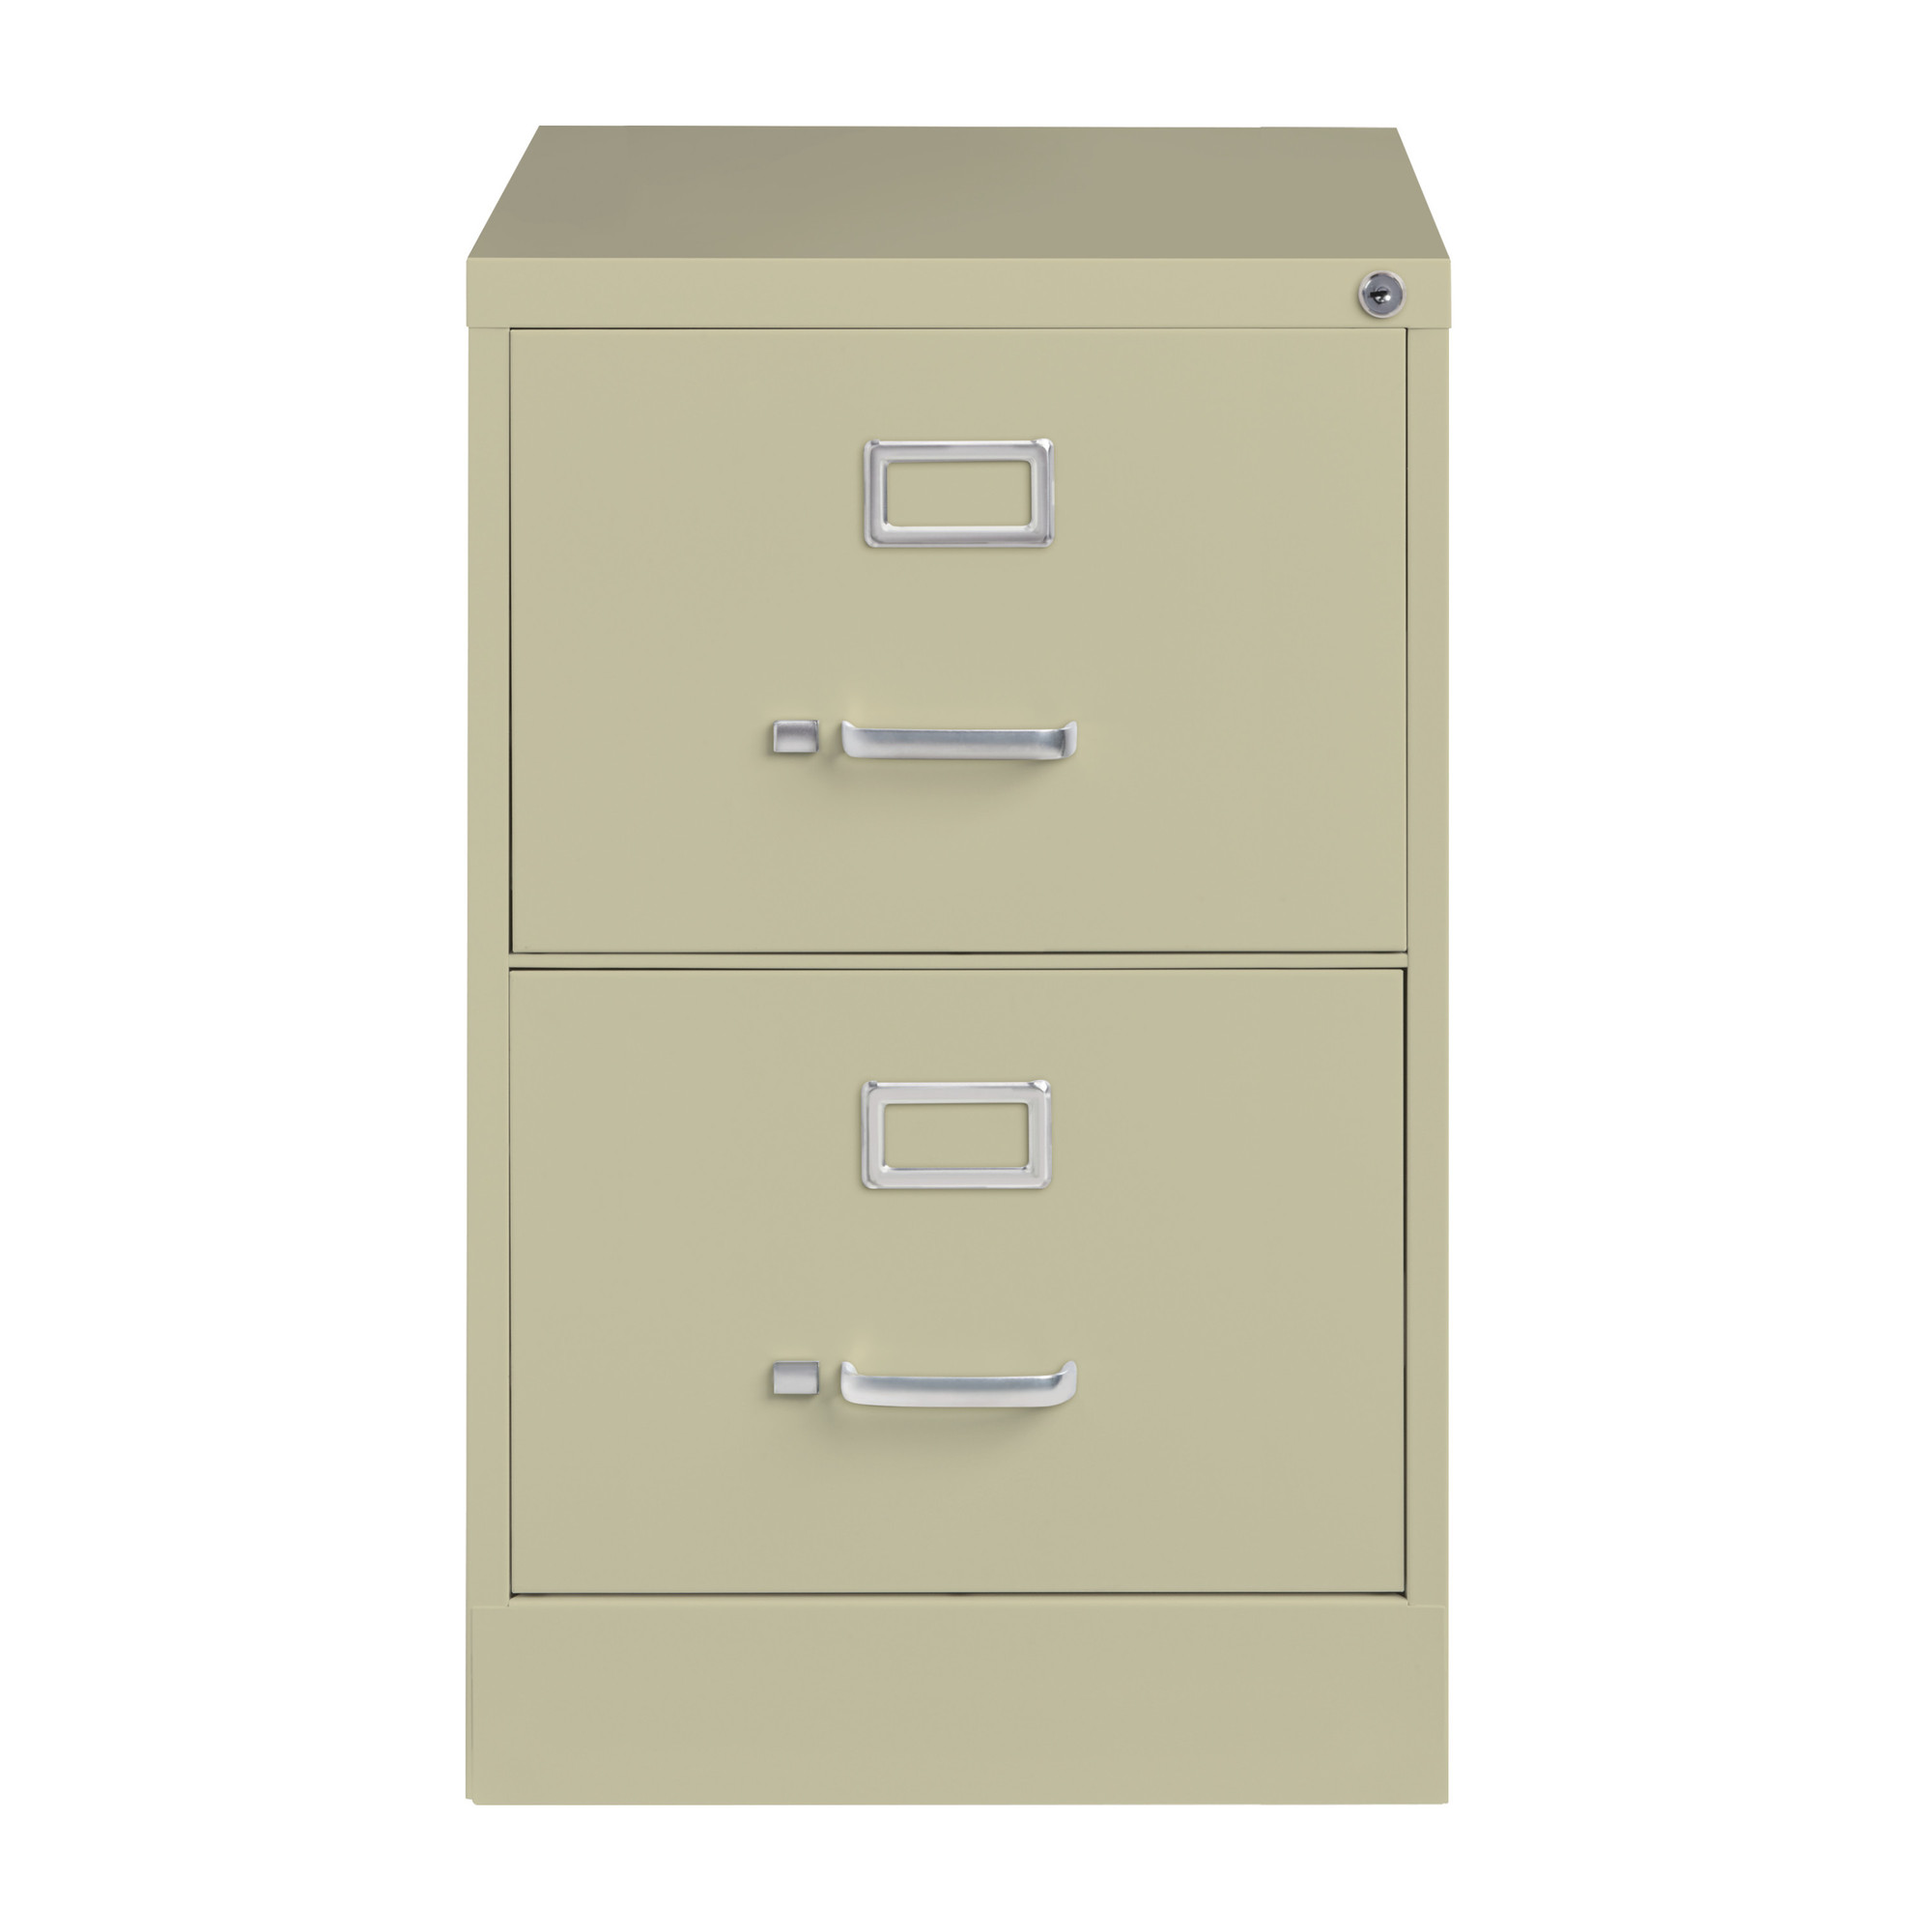 Hirsh Industries, 2 Drawer Legal Width File Cabinet Commercial Grade, Width 18 in, Depth 25 in, Height 28.375 in, Model 14412